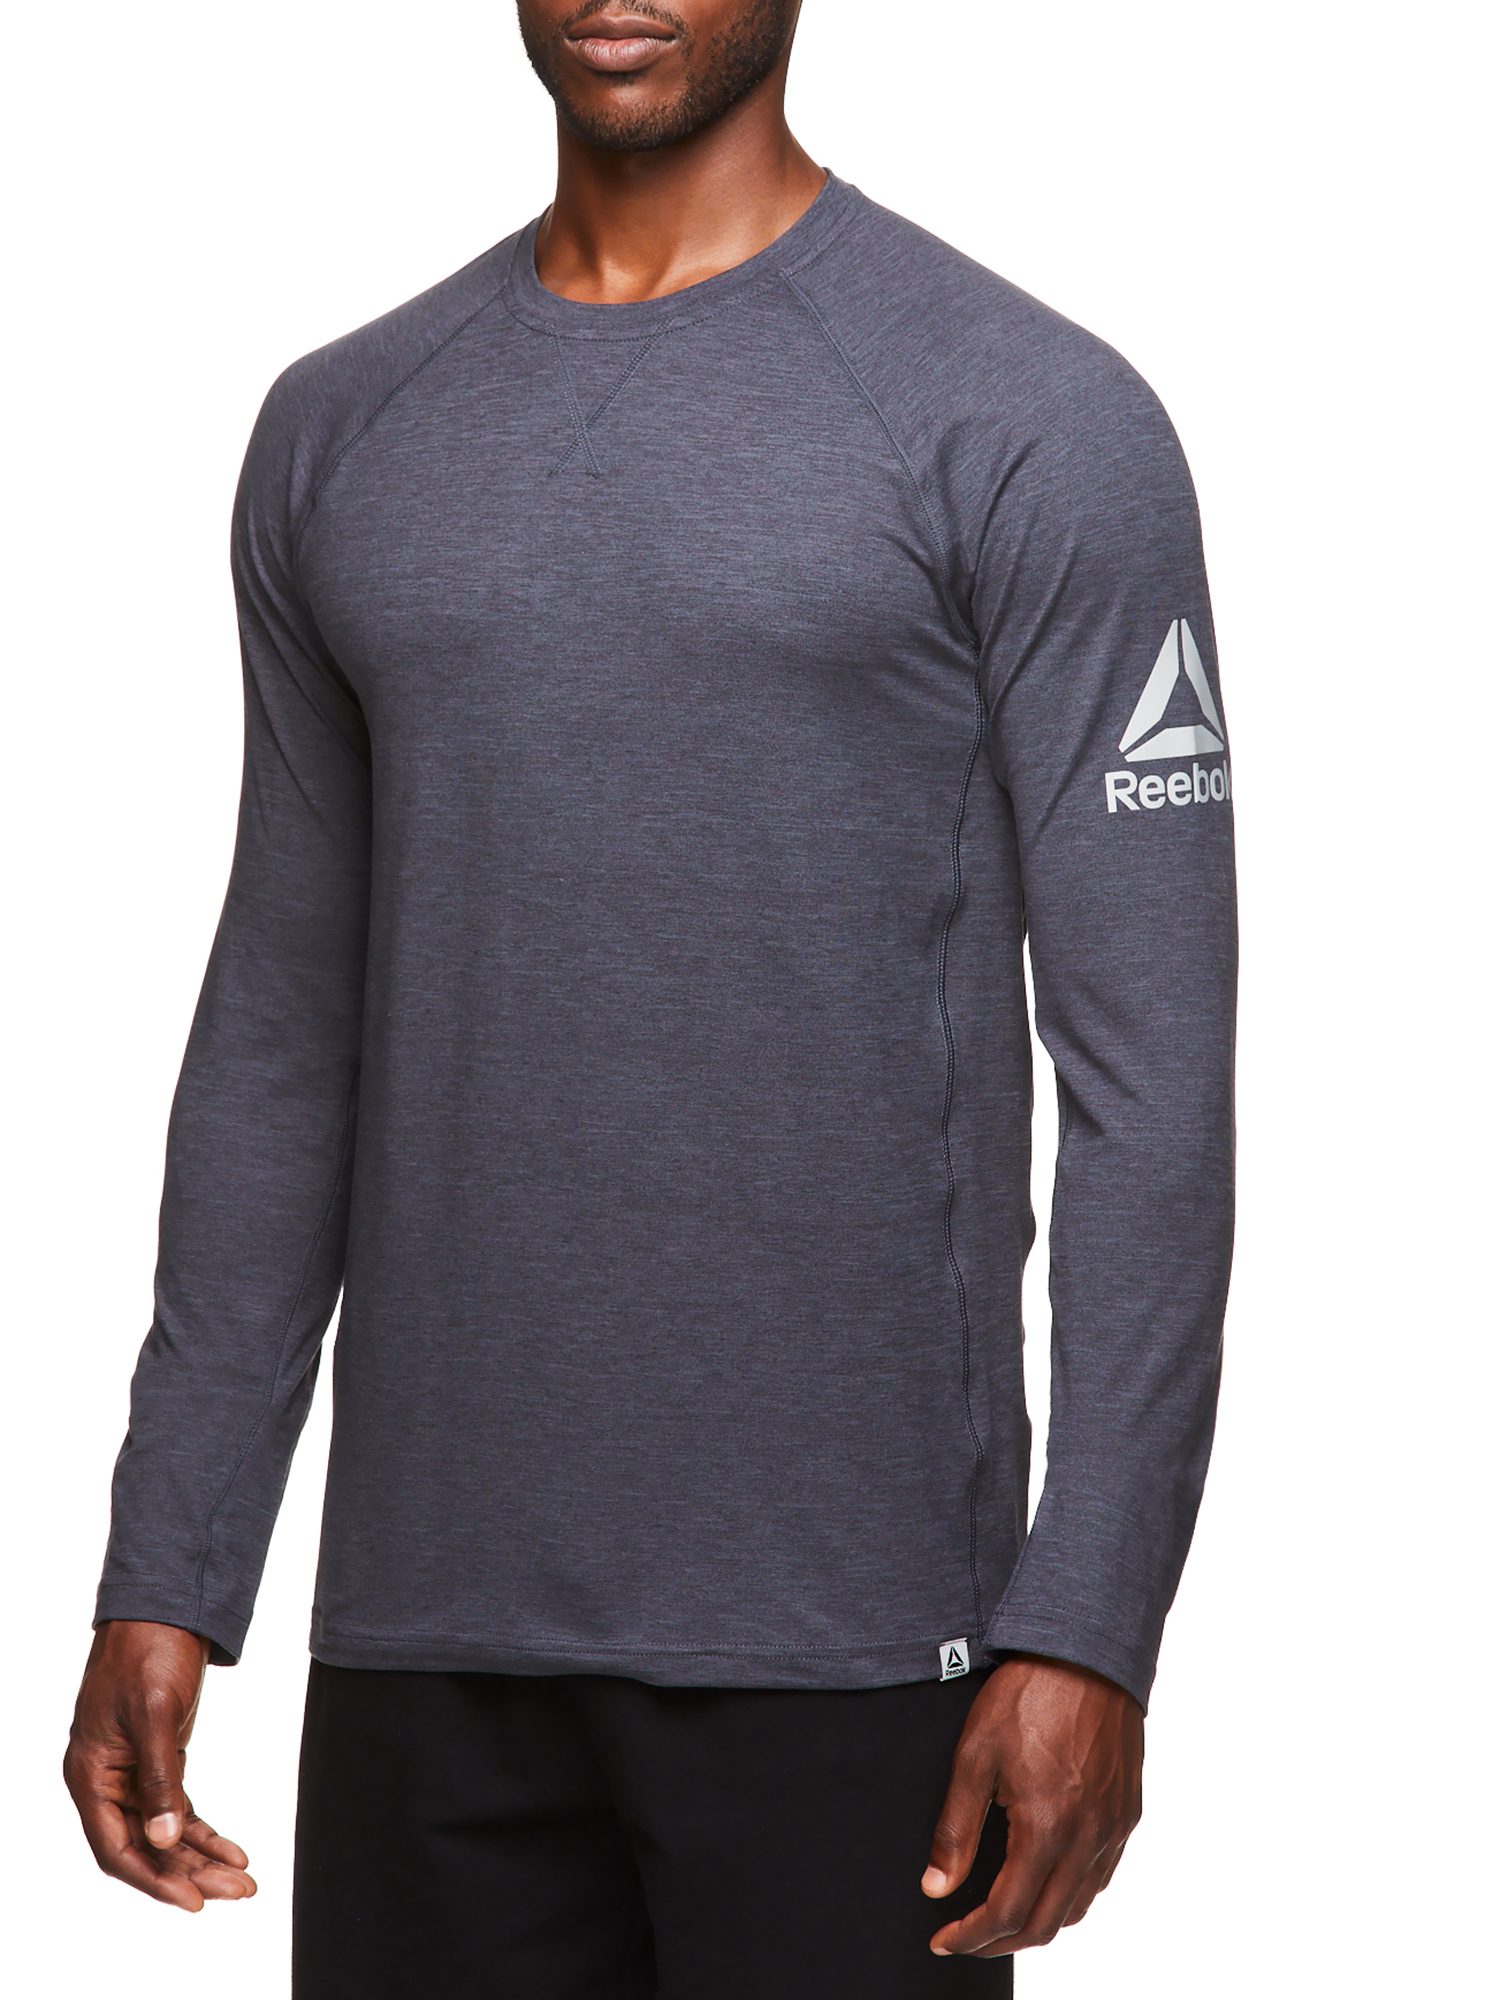 Reebok Men's and Big Men's Active Long Sleeve Warm-Up Training Crew, up to Size 3XL - image 3 of 4